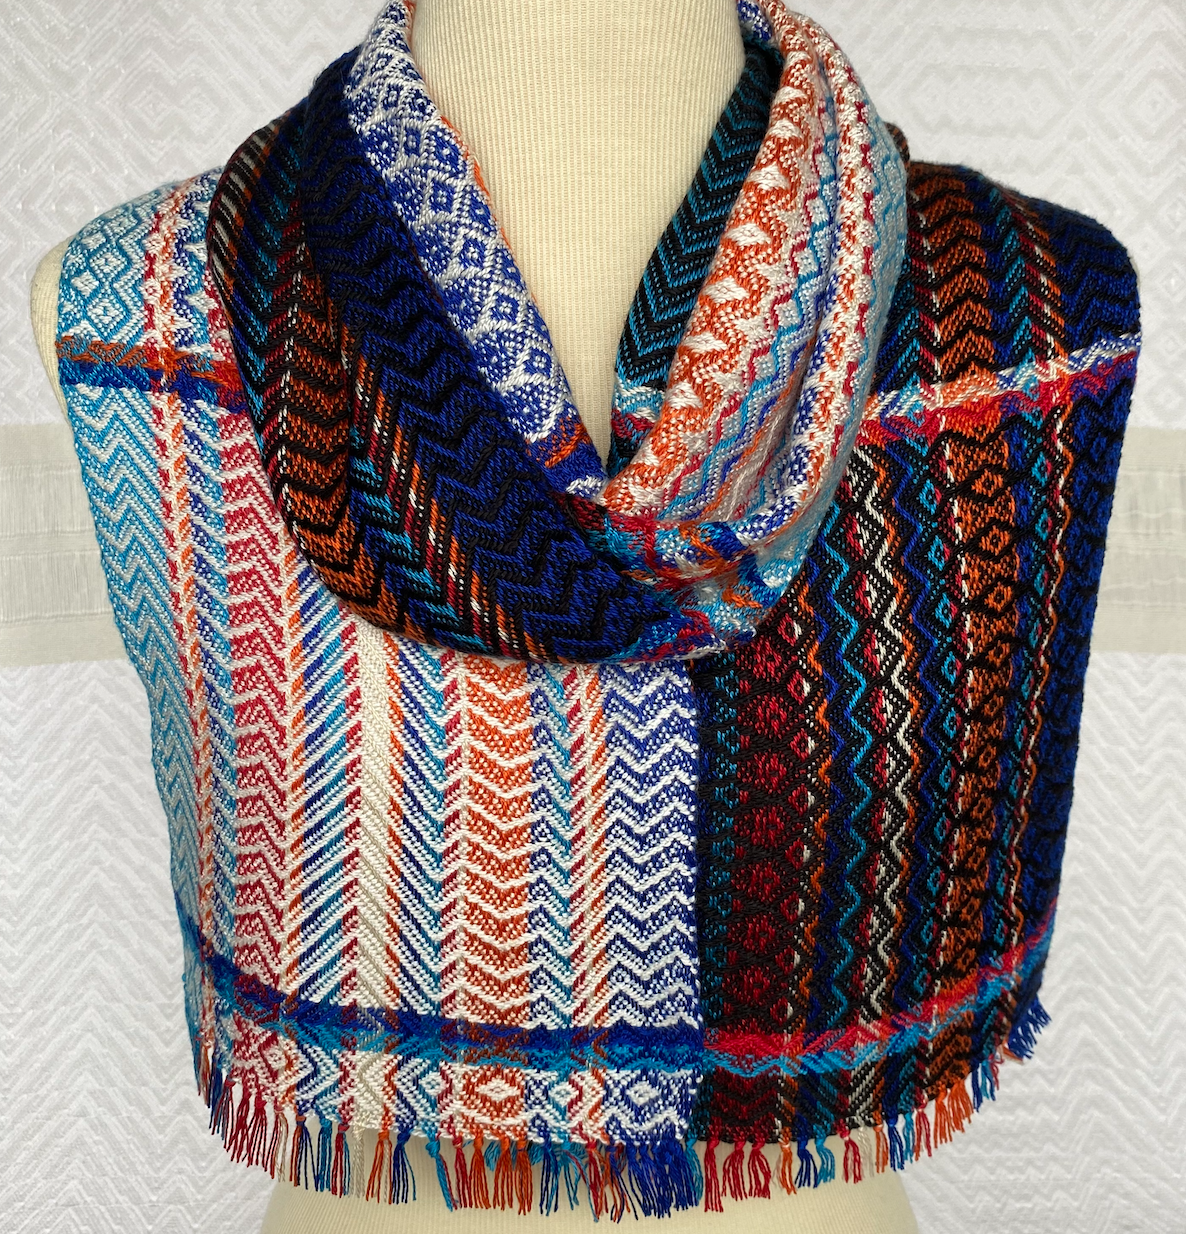  Stripes of Blue, Red, Orange and Cream with Black and White Bamboo Handwoven Scarf   